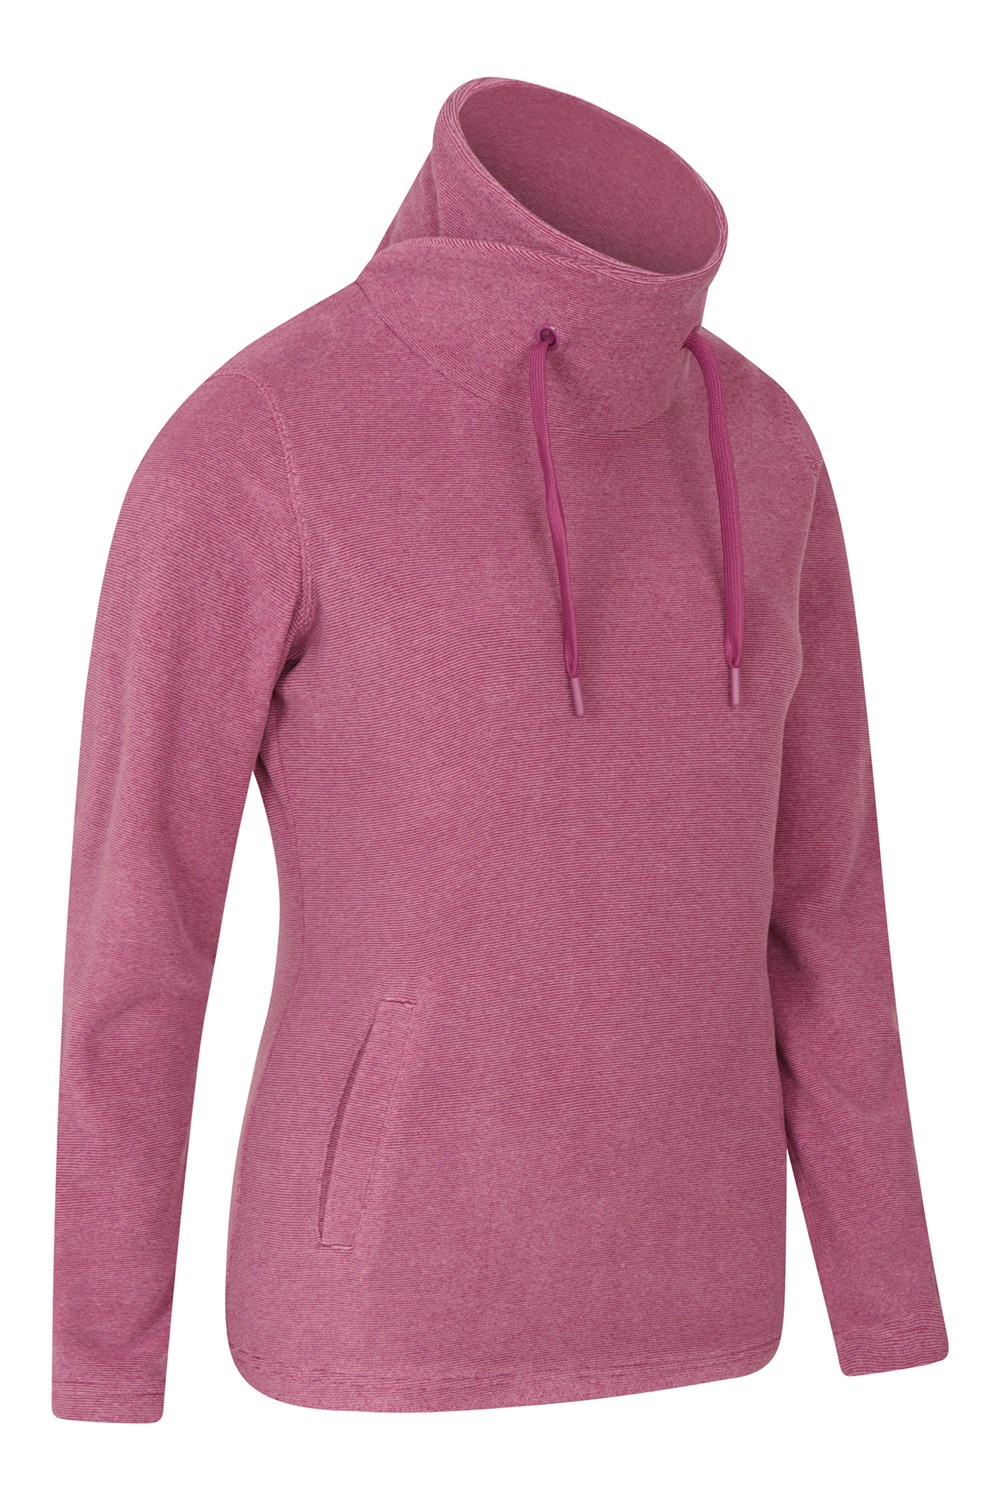 Mountain Warehouse Hebridean Womens Cowl Neck Fleece - Breathable Sweater,  Brushed Inner & Two Front Pockets – Ideal for Spring Summer, Travel 